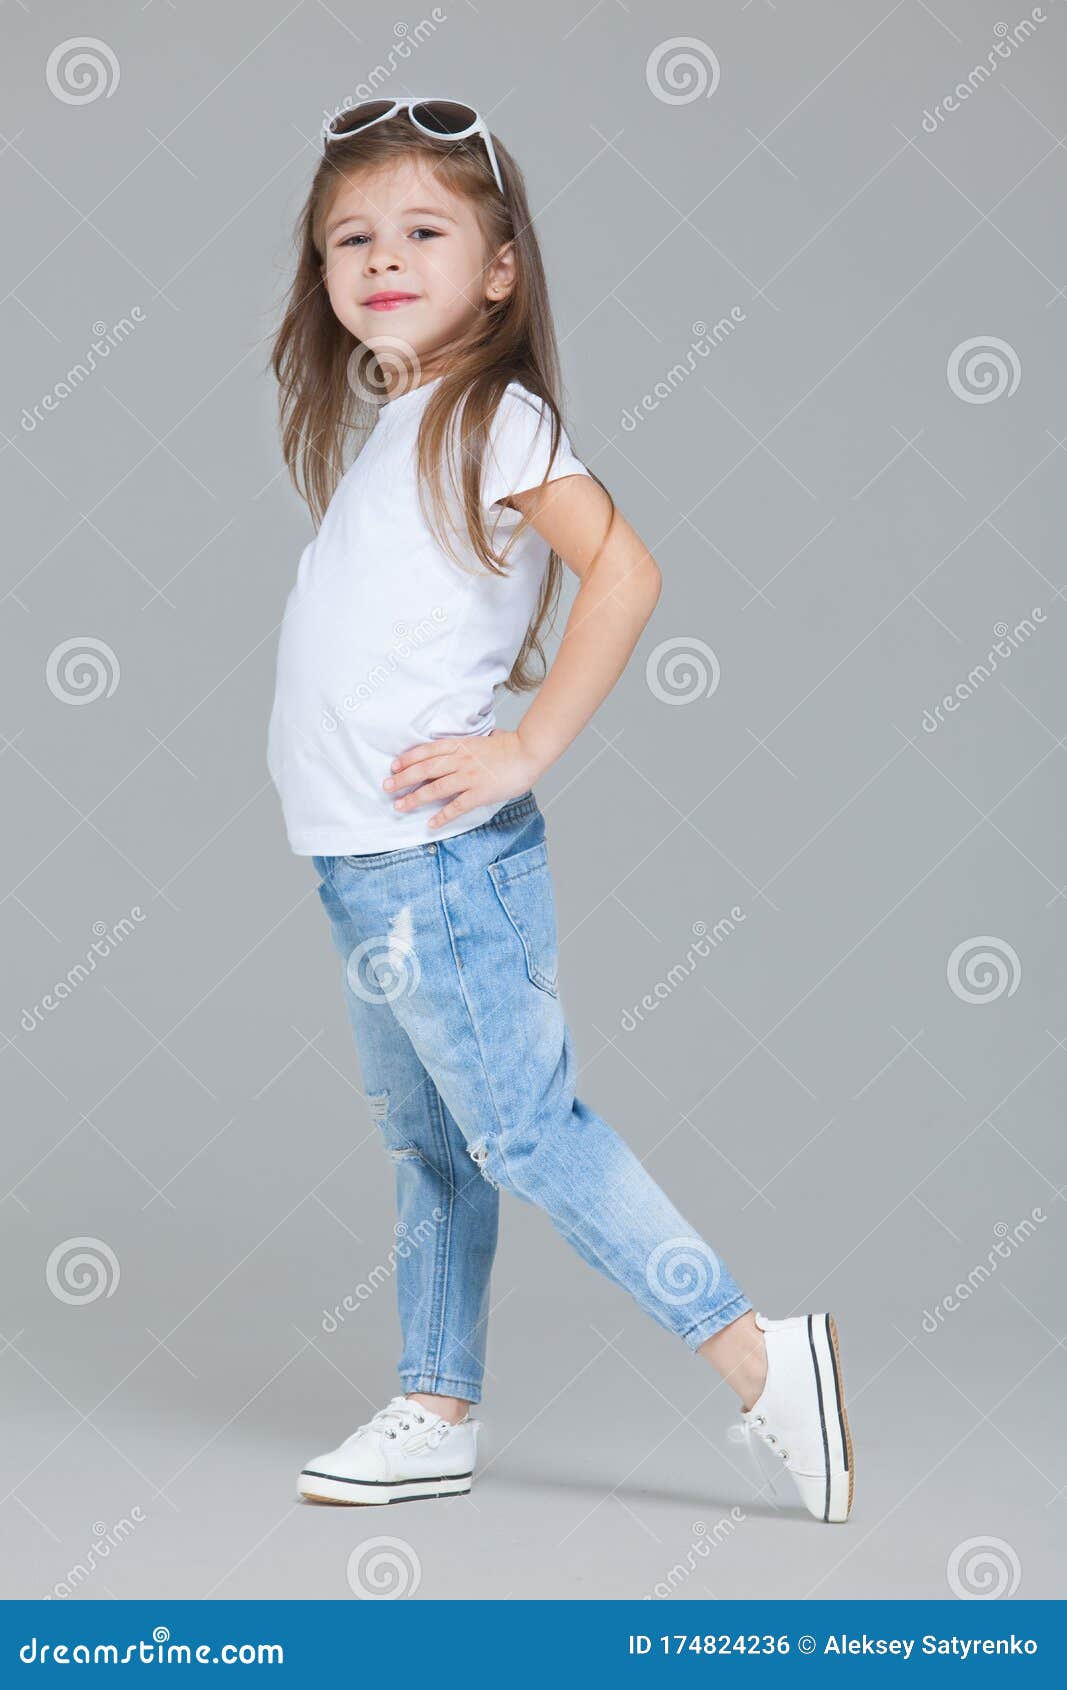 Blijven woede dozijn Kid Girl Preschooler in Blue Jeans, White T-shirt and Sunglasses is Posing  Isolated on Grey Background Stock Photo - Image of happy, beauty: 174824236